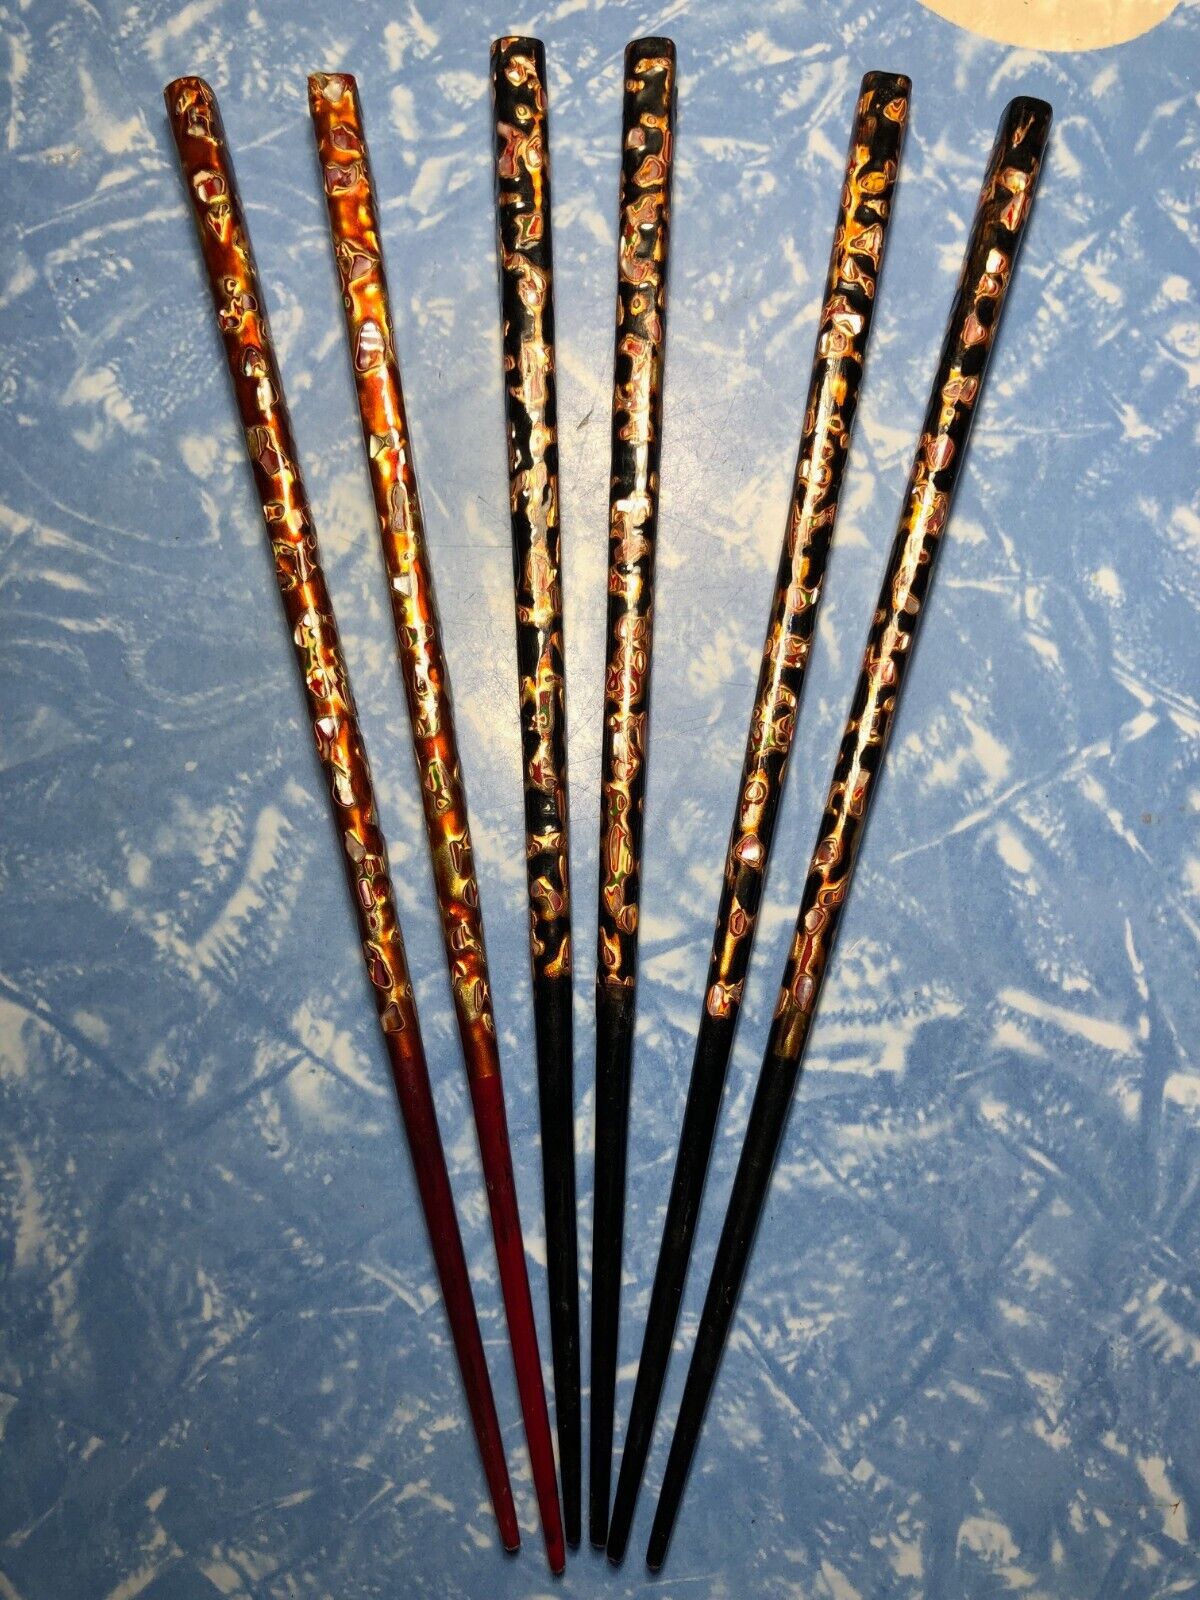 Vintage 50's Japanese Lacquered Inlaid Chopsticks - Three Sets